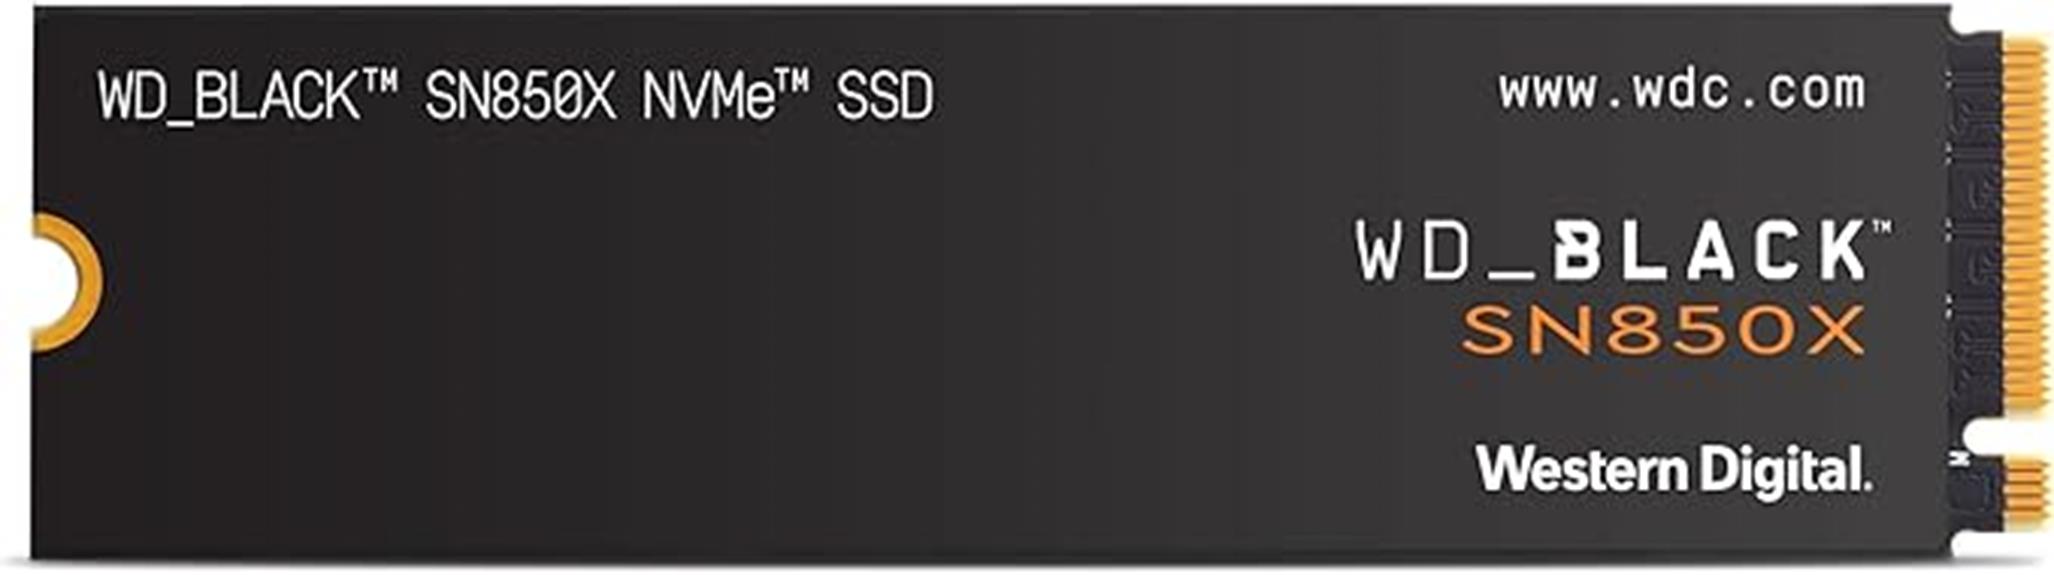 high speed gaming ssd drive